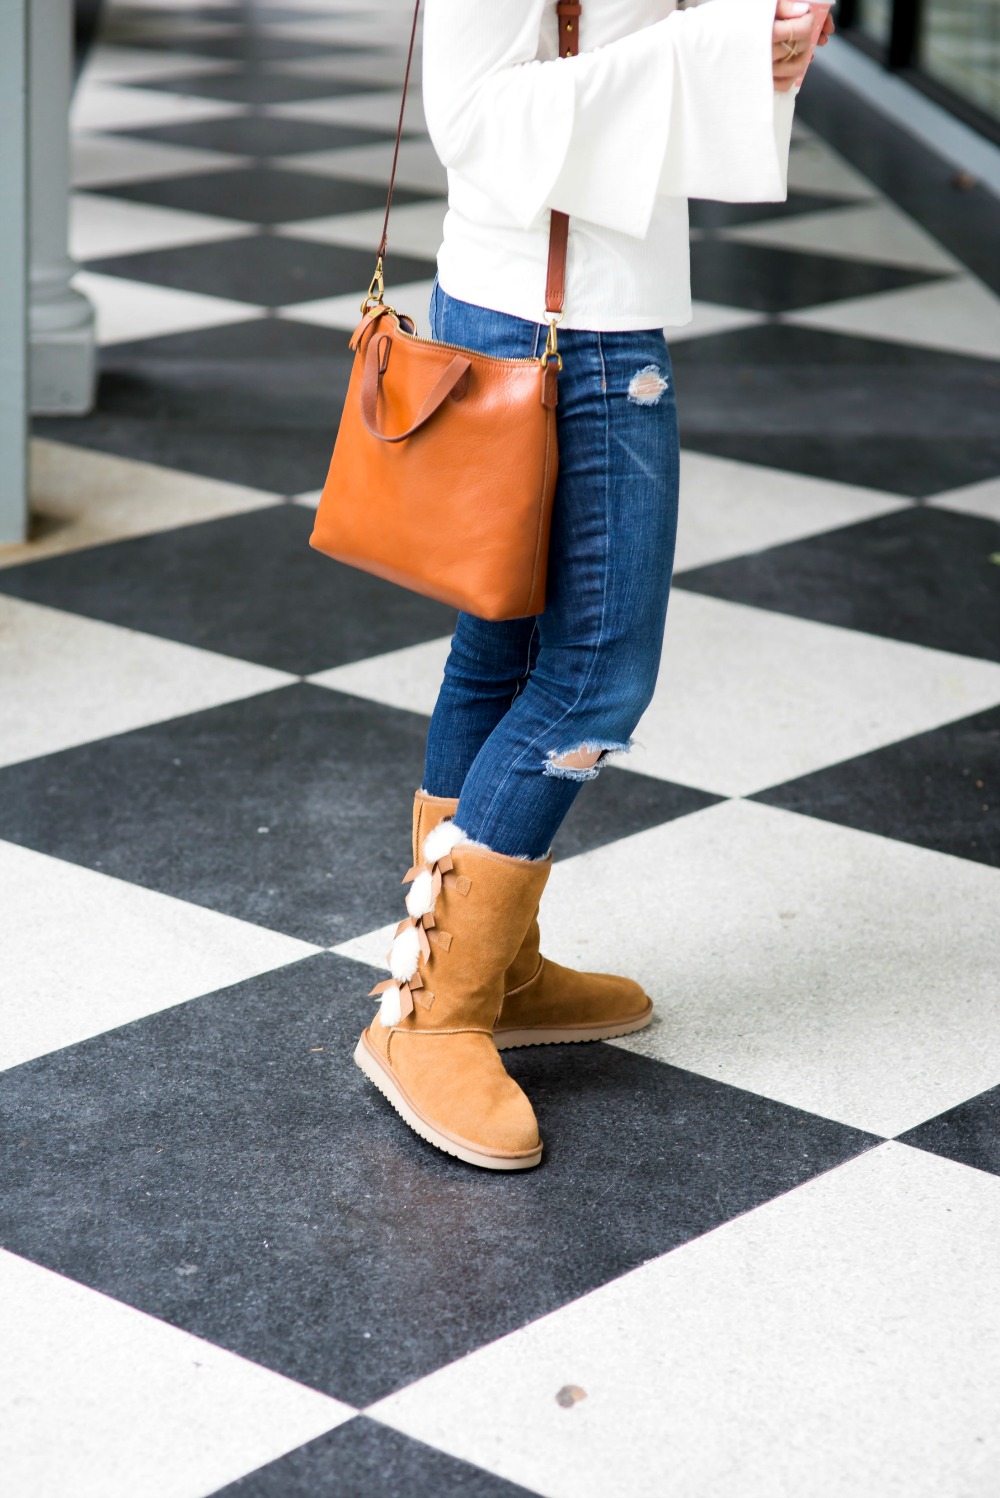 Cozy cute winter style - winter boots edition by popular Florida style blogger The Modern Savvy